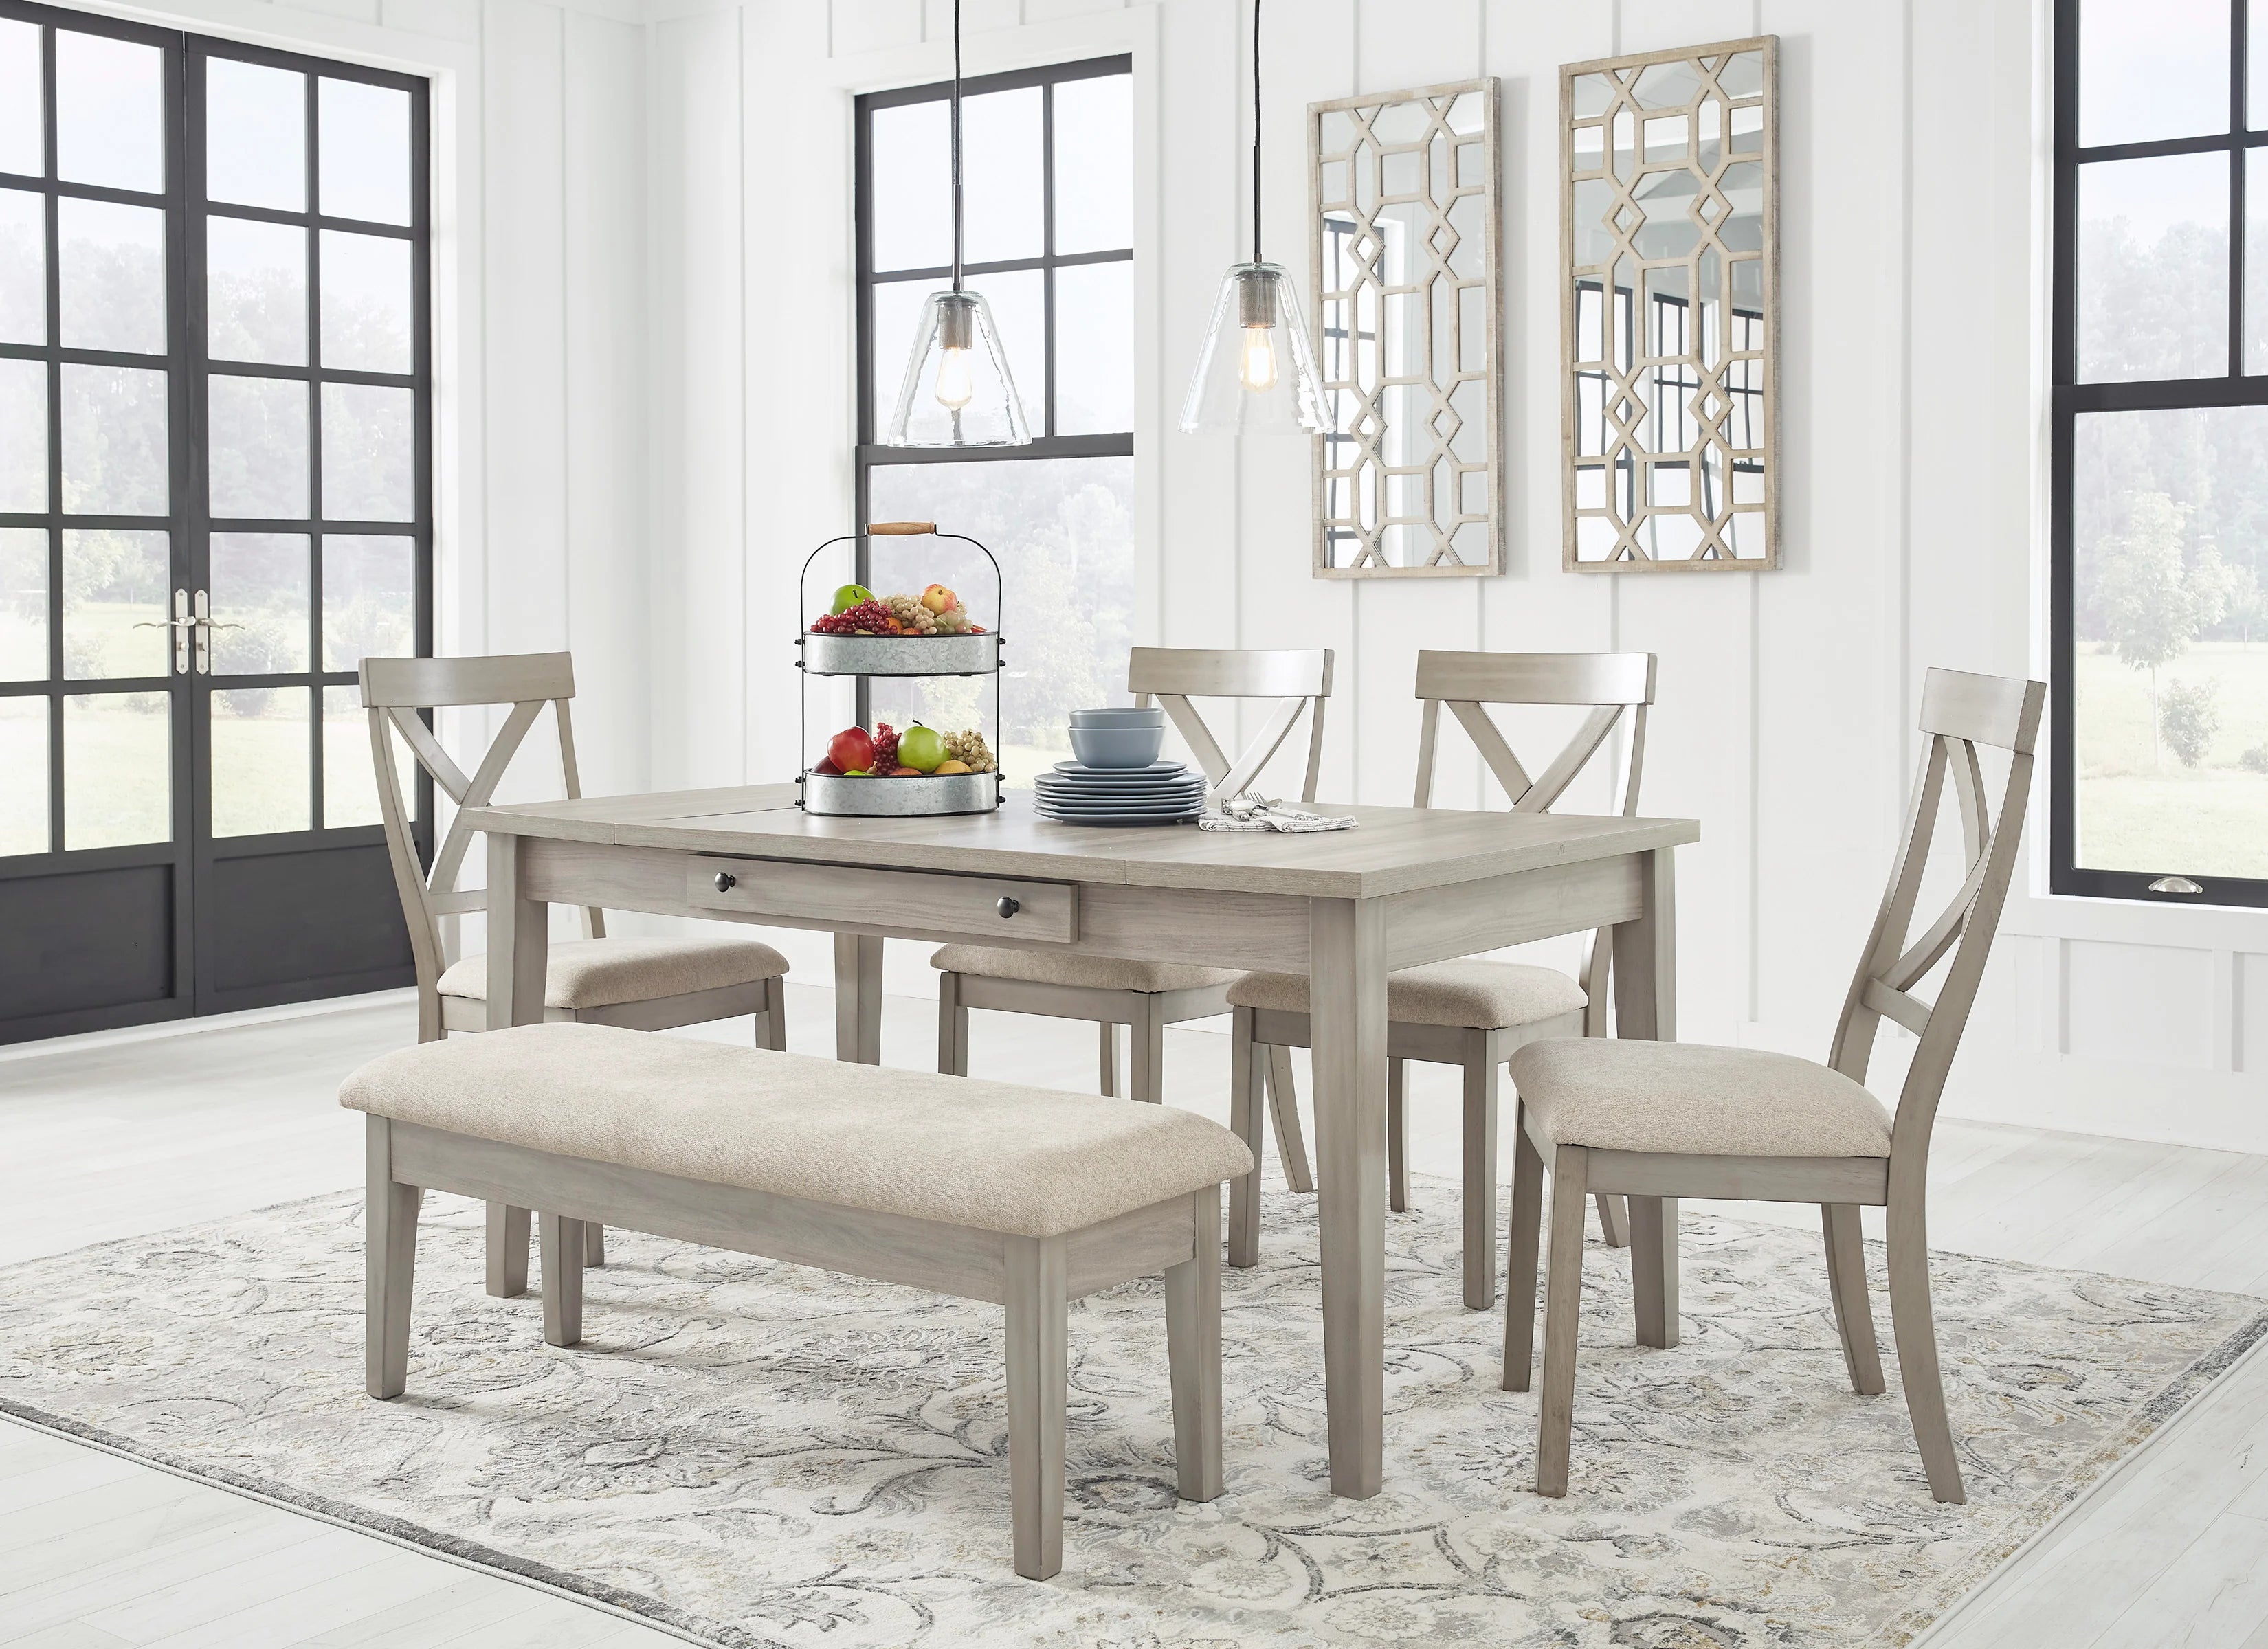 Parellen Dining Table and Chairs Set